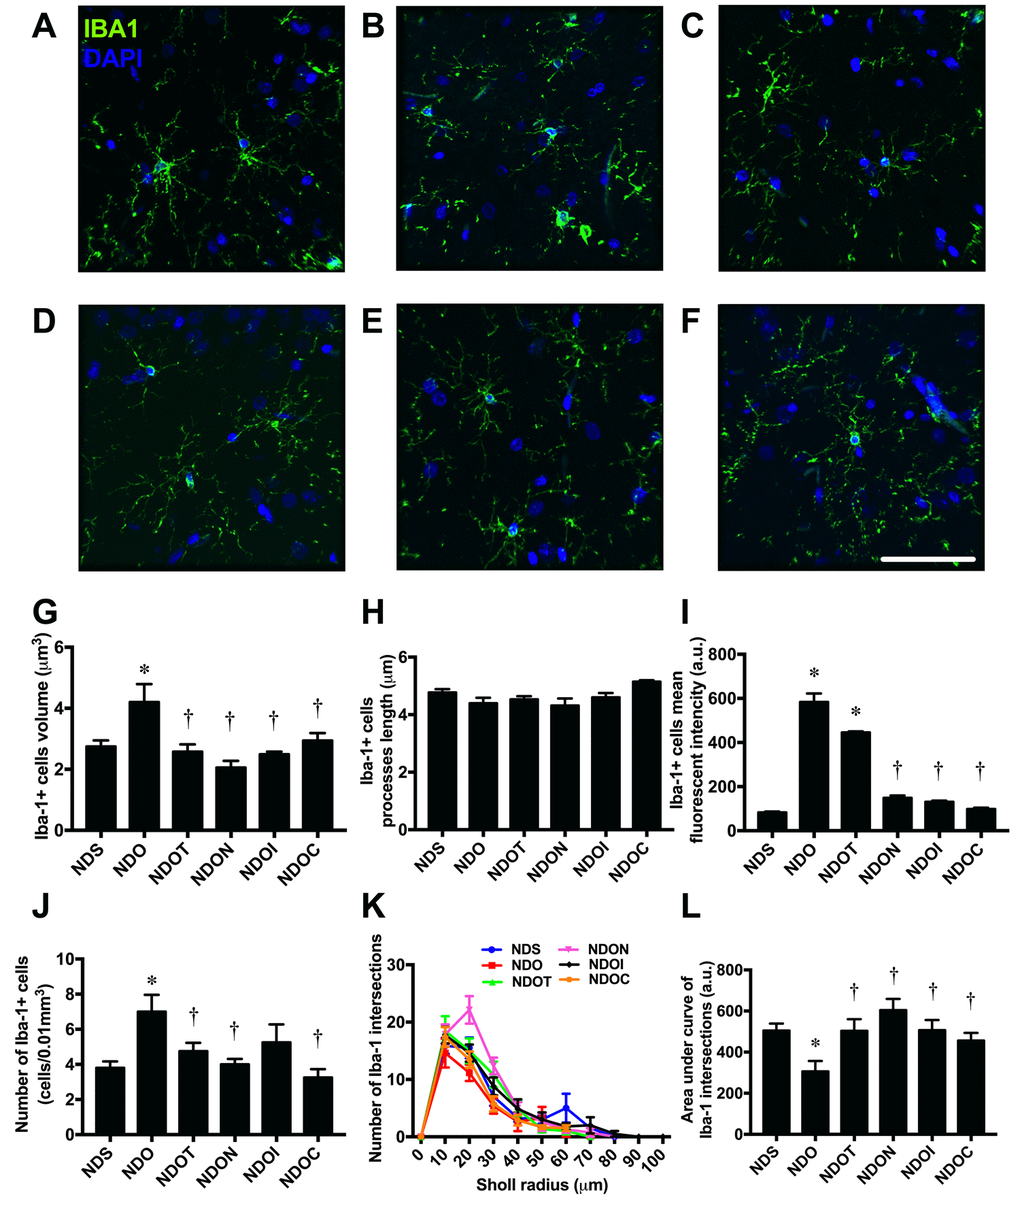 The effects of NAC, inulin and combined therapy on microglial morphology in rats with testosterone deprivation. (A-F) Representative images of Iba-1 and DAPI immunofluorescence under confocal microscopy at CA1 of the hippocampus of NDS, NDO, NDOT, NDON, NDOI, and NDOC respectively (bar = 50 𝜇m). (G) Size of microglial cells as indicated by Iba-1 positive cell volume. (H) Length of Microglial processes as indicating Iba1 positive cells processes length. (I) Mean fluorescent intensity of Iba-1 positive cells. (J) Number of microglial cell as indicated by number of Iba-1 positive cells. (K-L) The ramification the microglial cells as indicated by Sholl analysis and area under the curve of Iba-1 intersection respectively. NDS: rats with sham operation; NDO: rats with orchiectomy; NDOT: rats with orchiectomy receiving testosterone replacement; NDON: rats with orchiectomy receiving NAC treatment; NDOI: rats with orchiectomy receiving inulin treatment; NDOC: rats with orchiectomy receiving the combined therapy (the combination of NAC and inulin) (N=6 in each group) *p